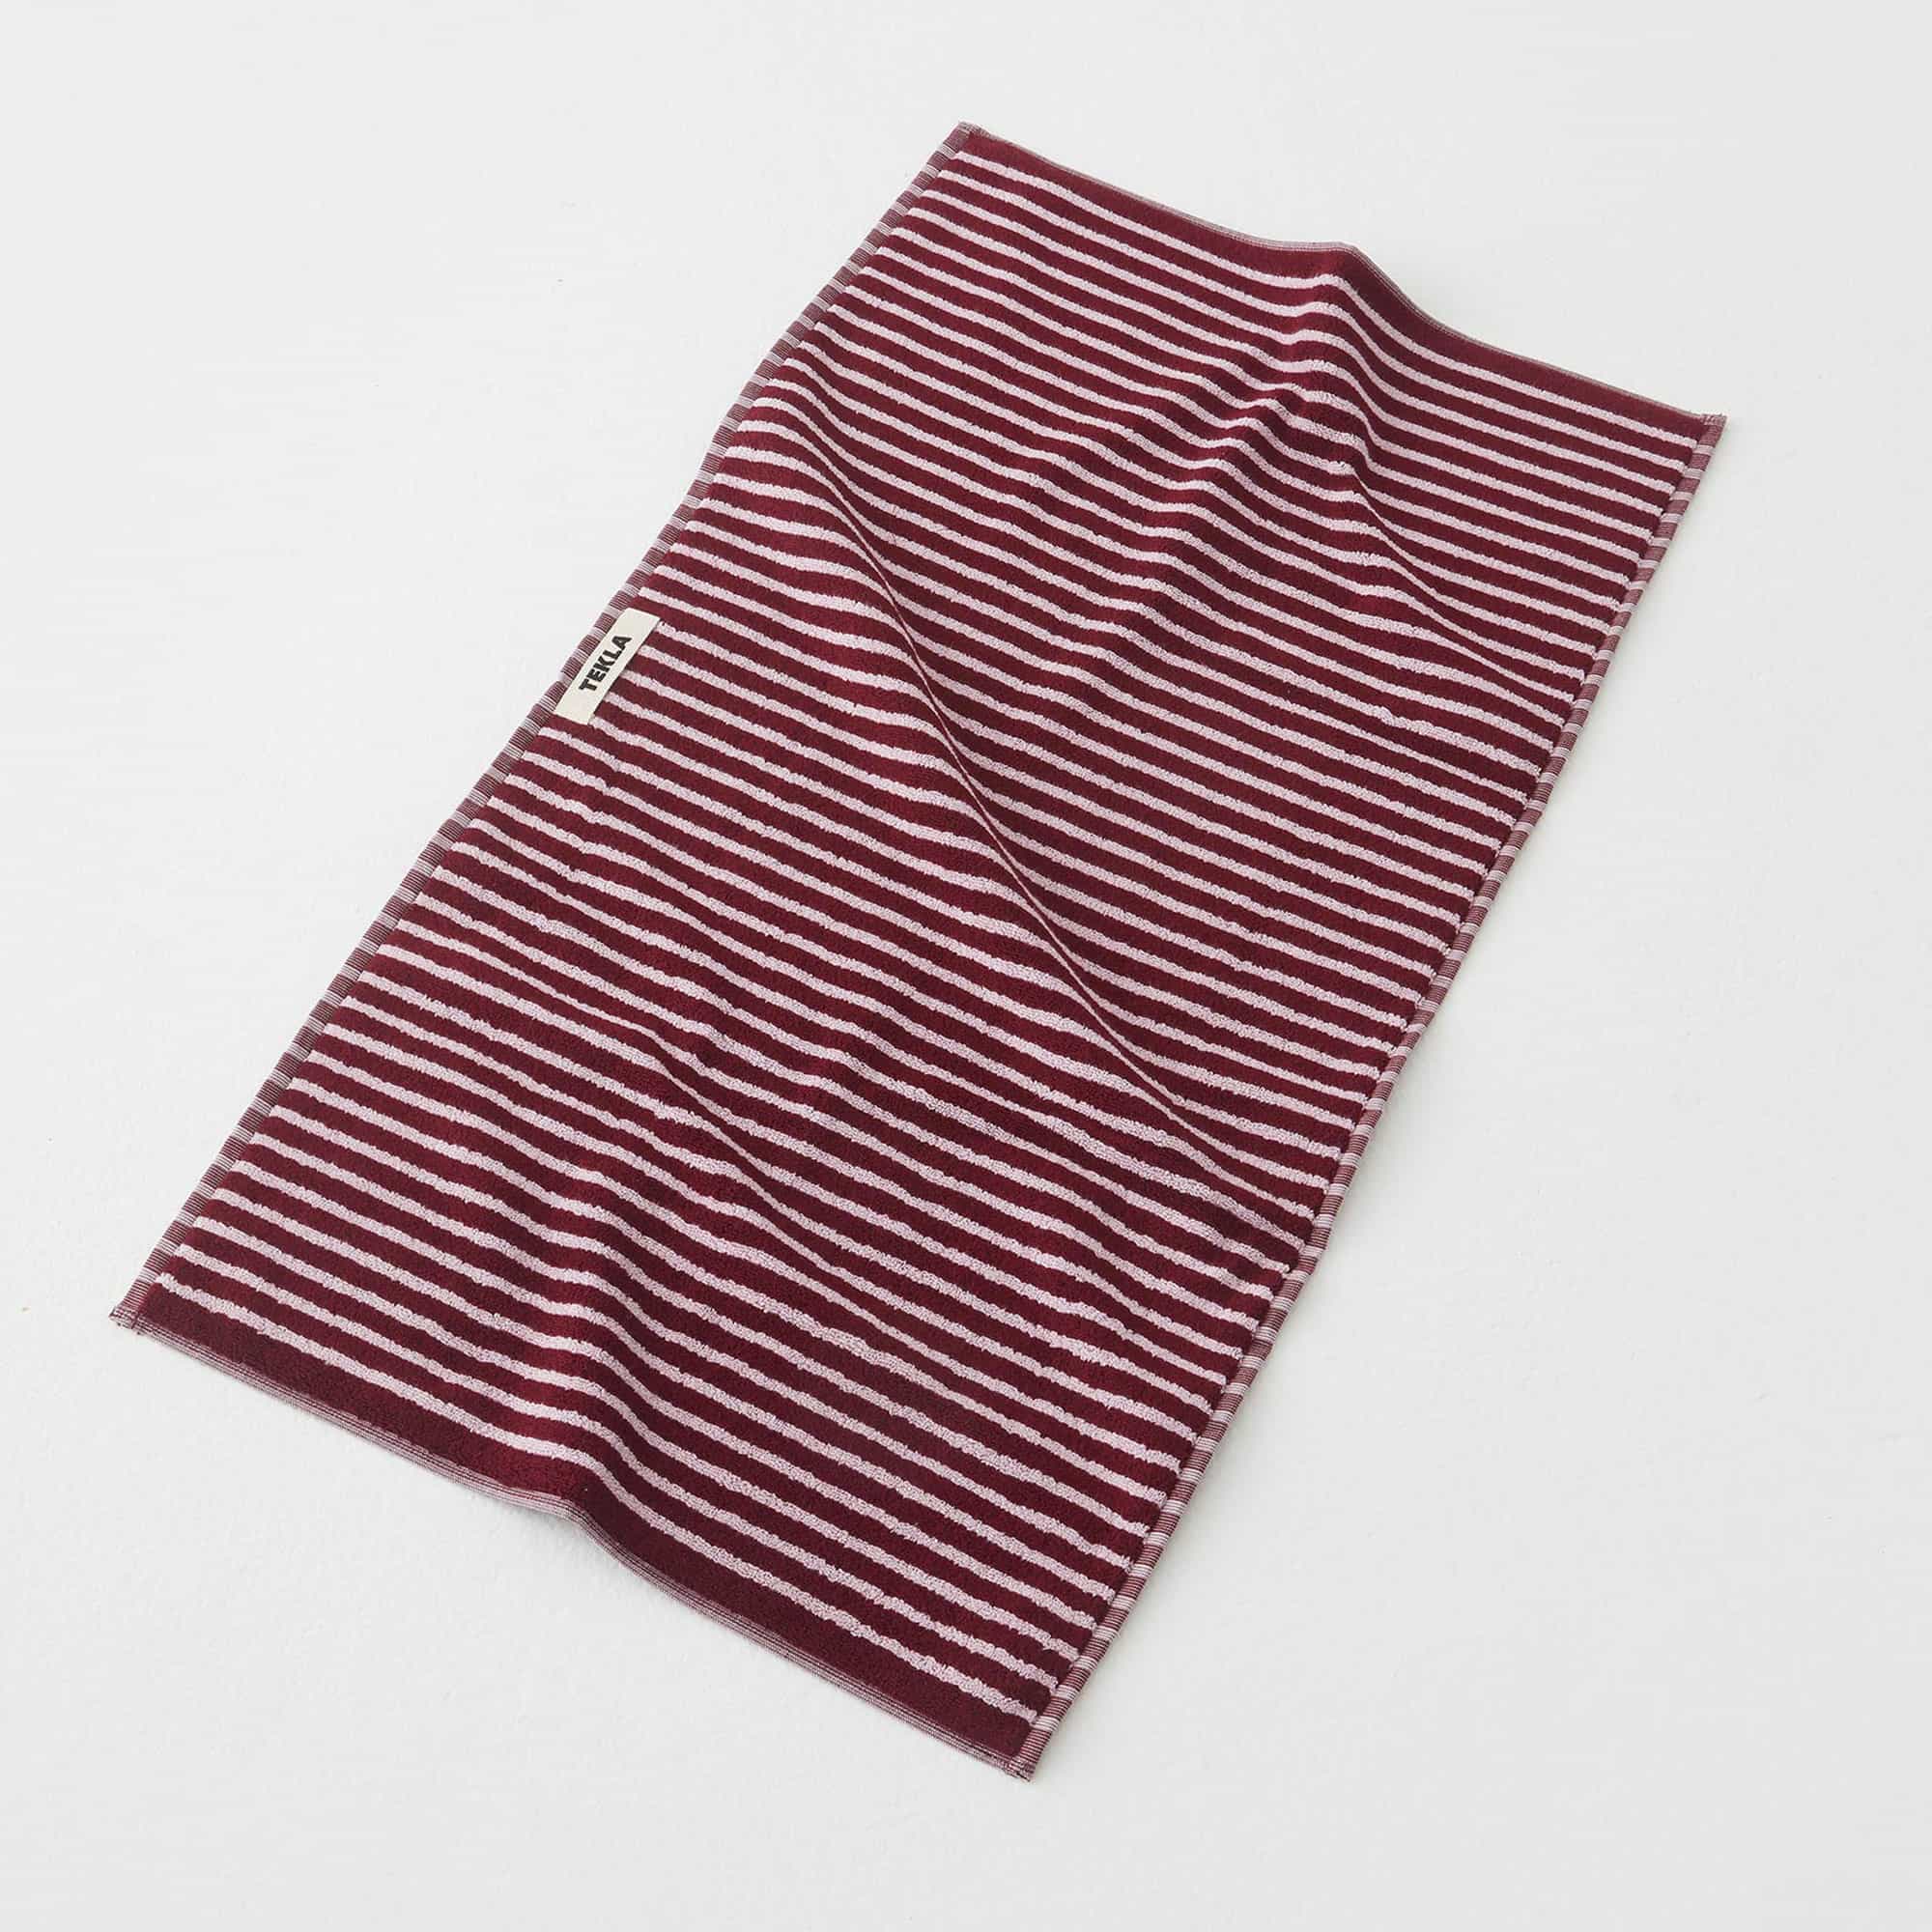 Terry Towel Striped Red  Rose